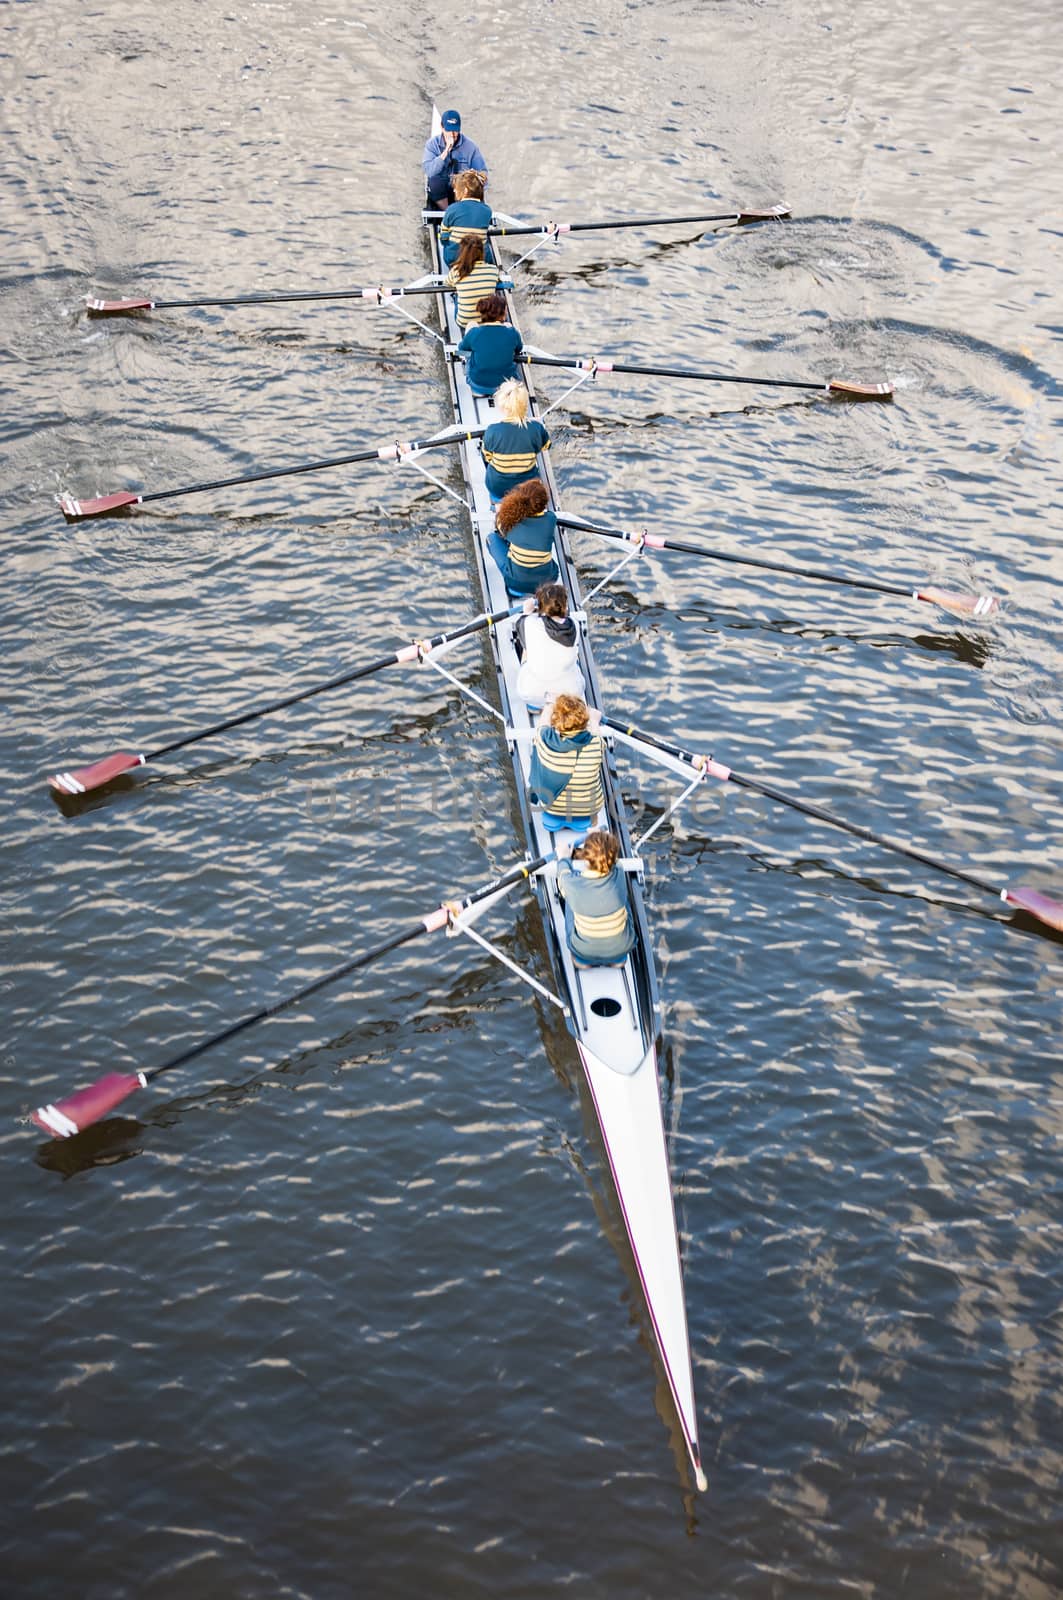 ADELAIDE, AUSTRALIA - AUGUST 5: rowing training on the river downtown on August 5, 2010 in Adelaide, south Australia